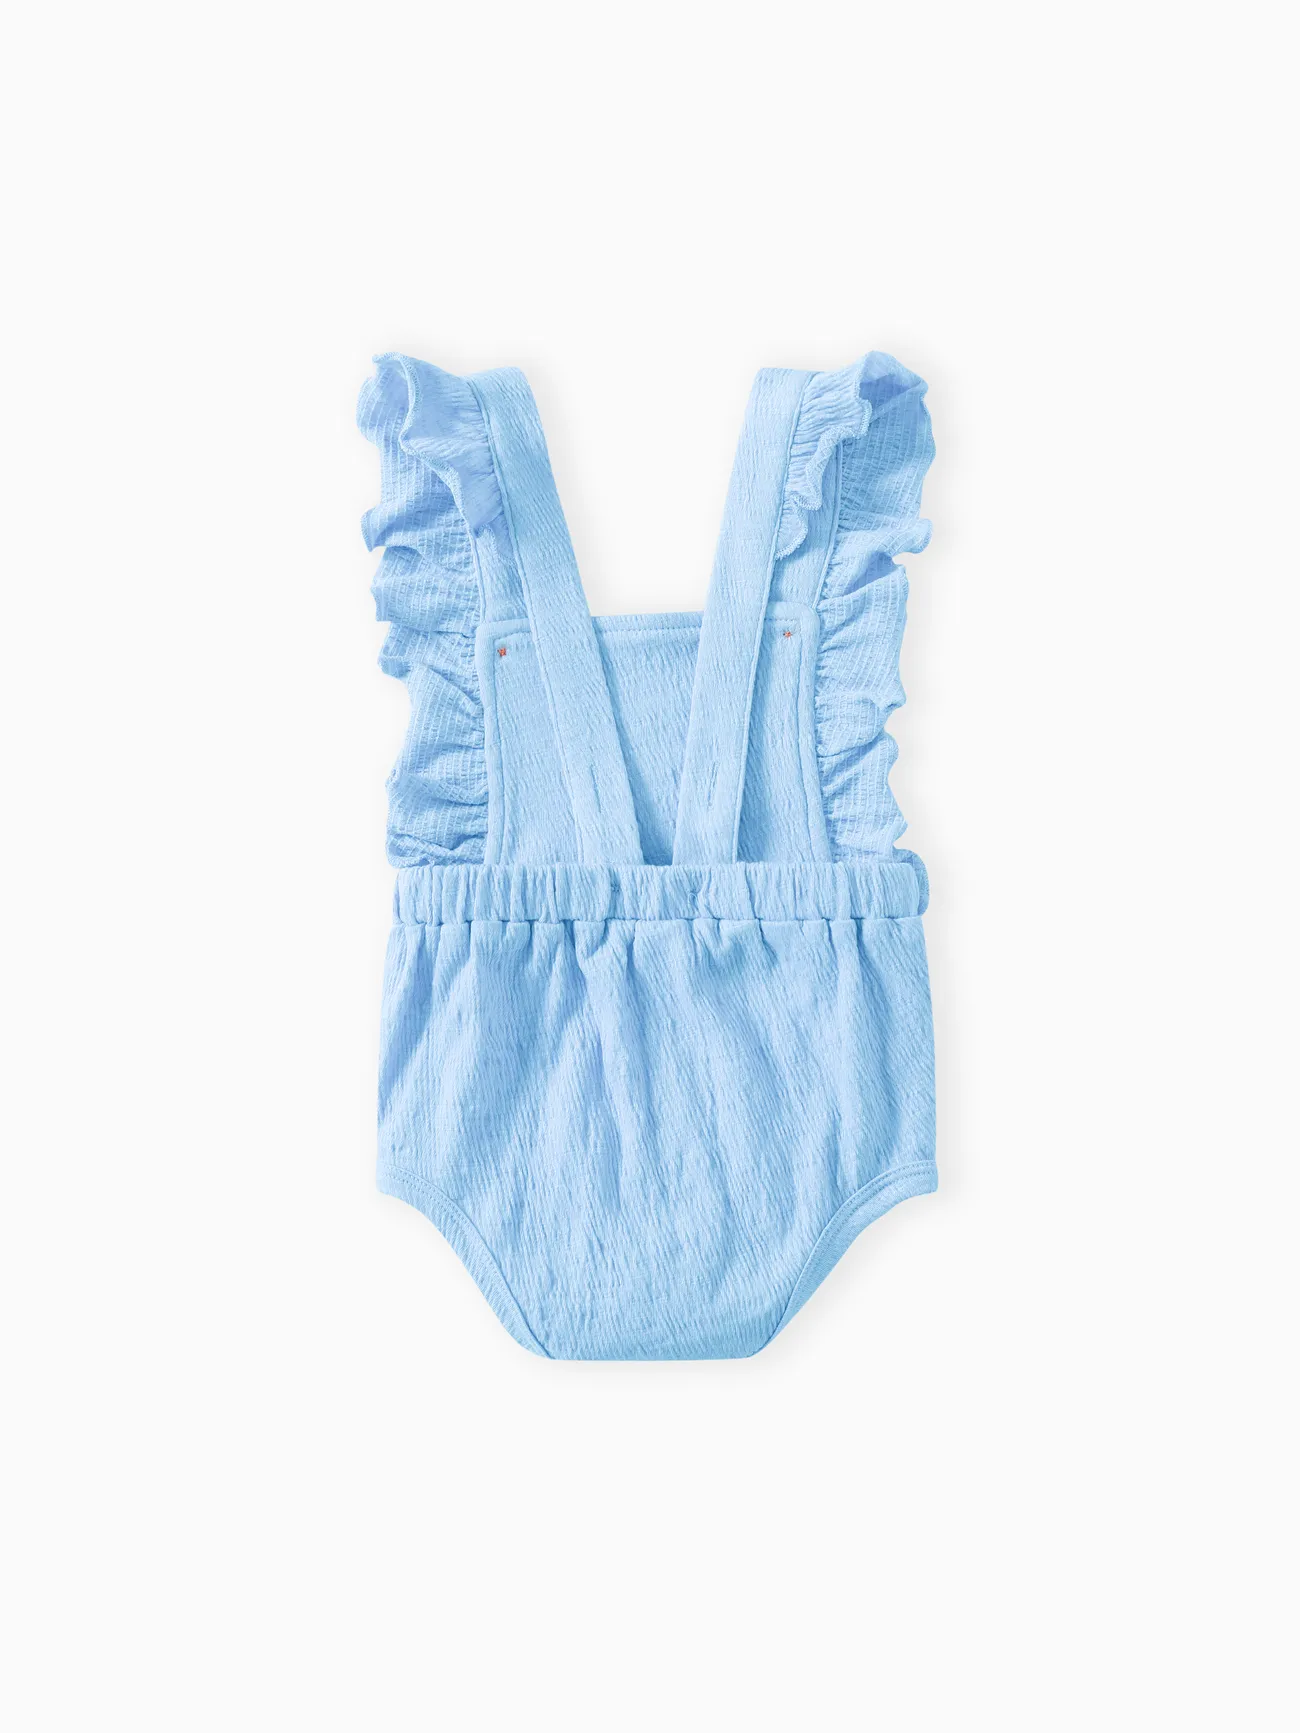 Baby Girl Solid Color Ruffled Button Romper Blue big image 1